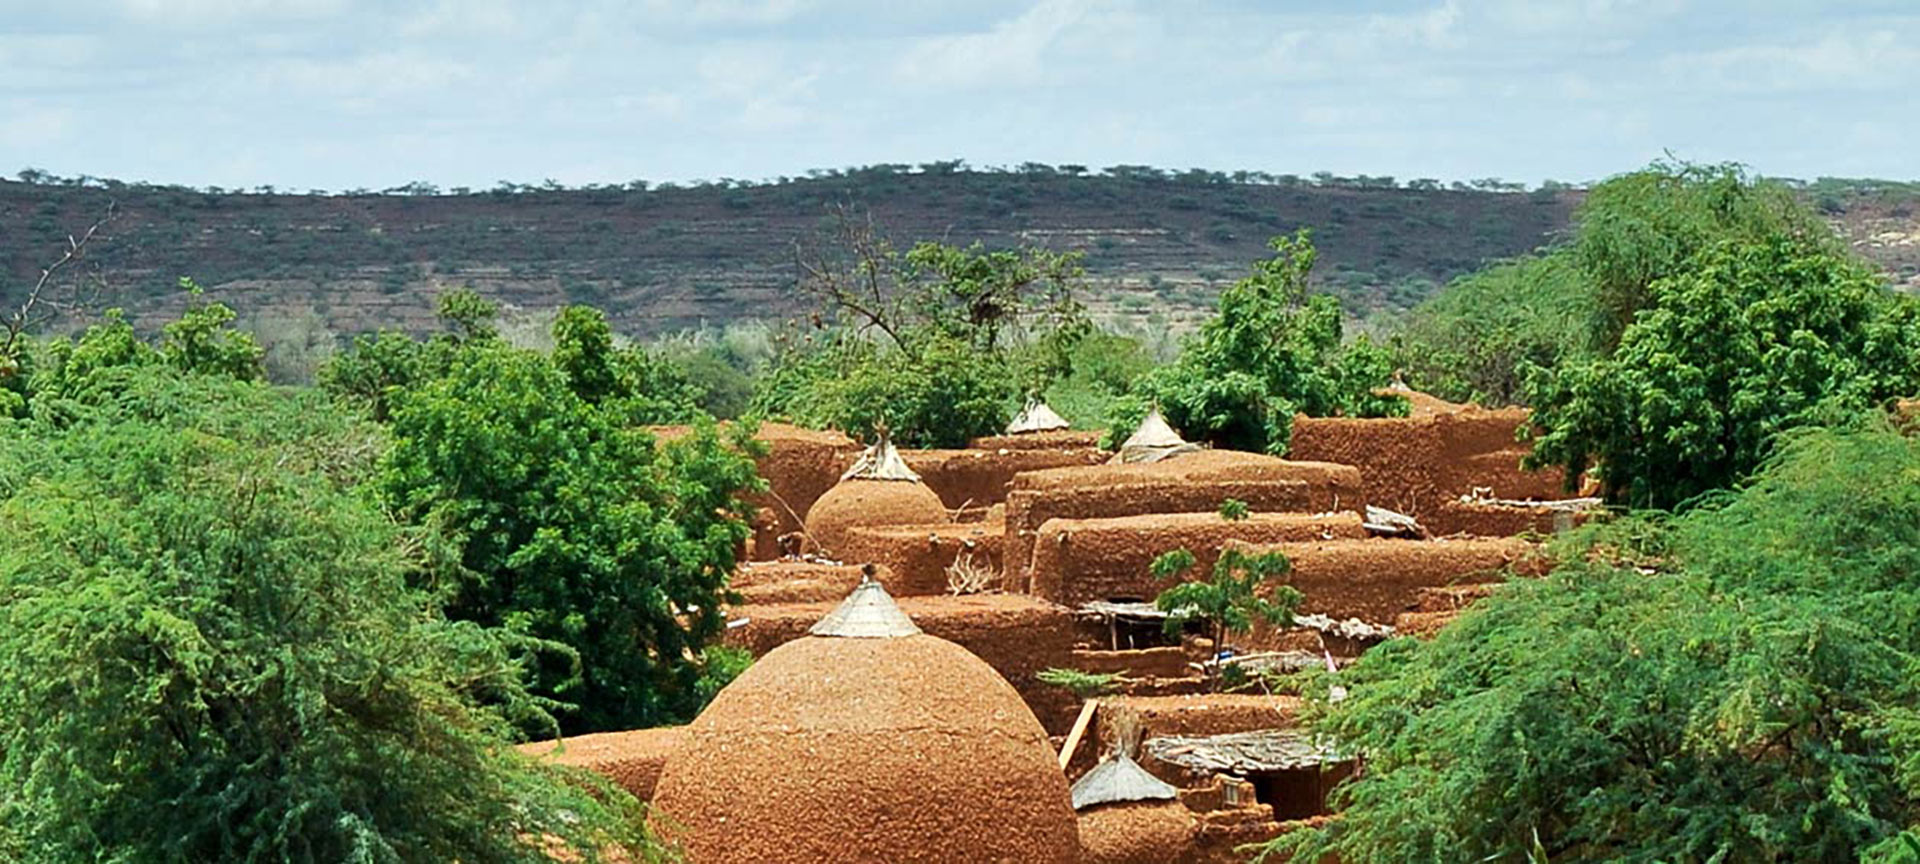 Landscape and rooftops in Niger